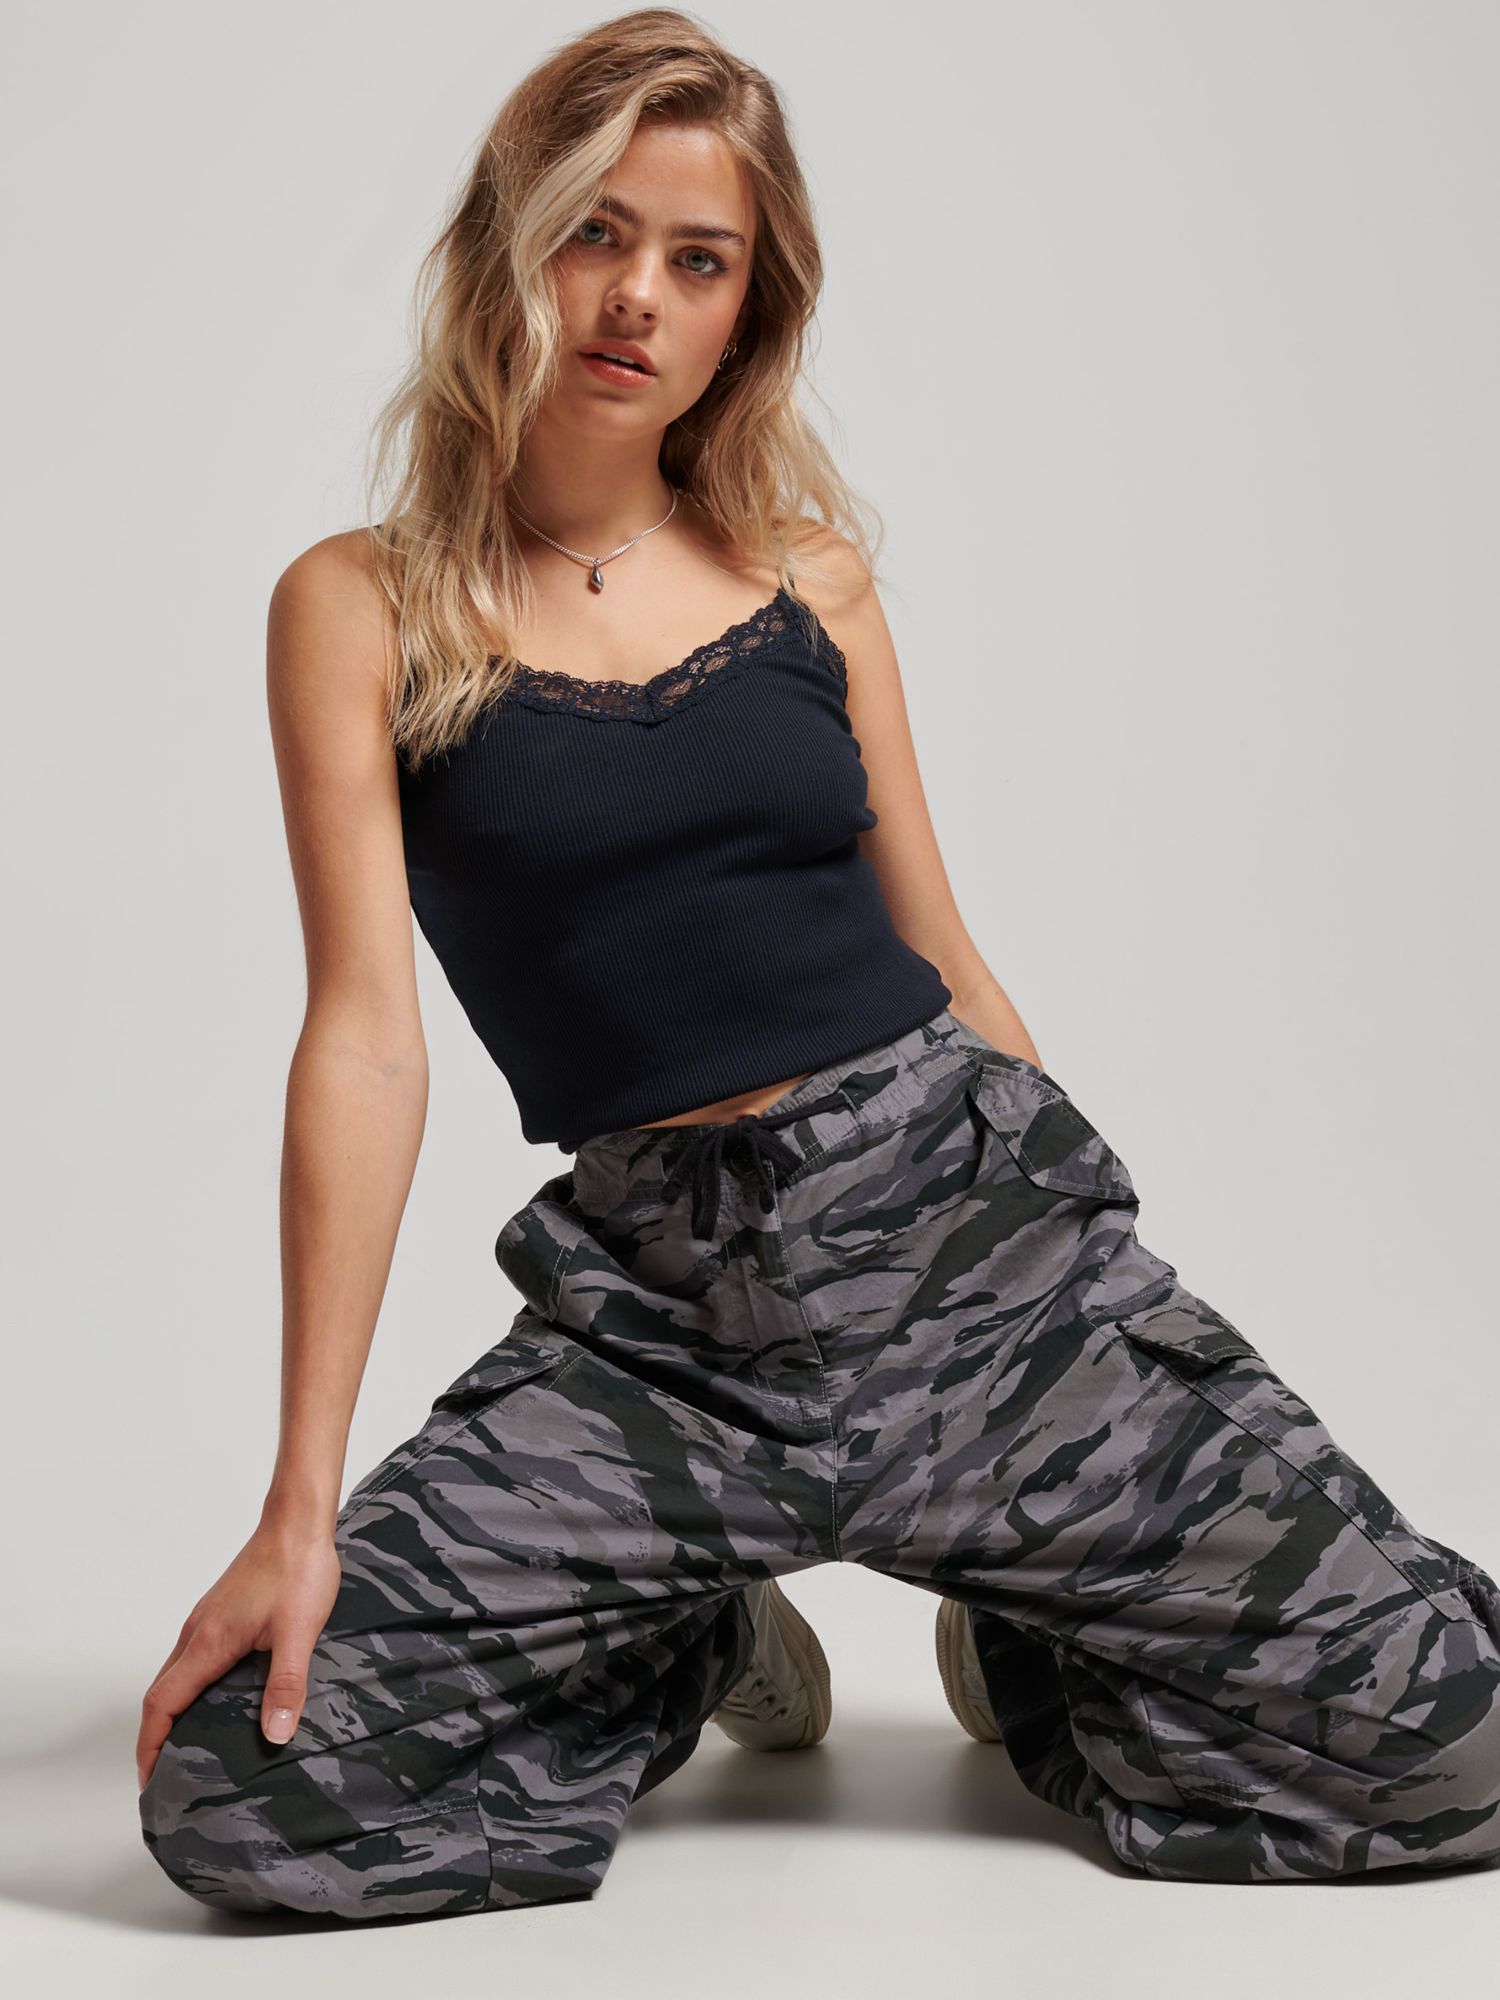 Superdry Baggy Parachute Pants, Marne Pink